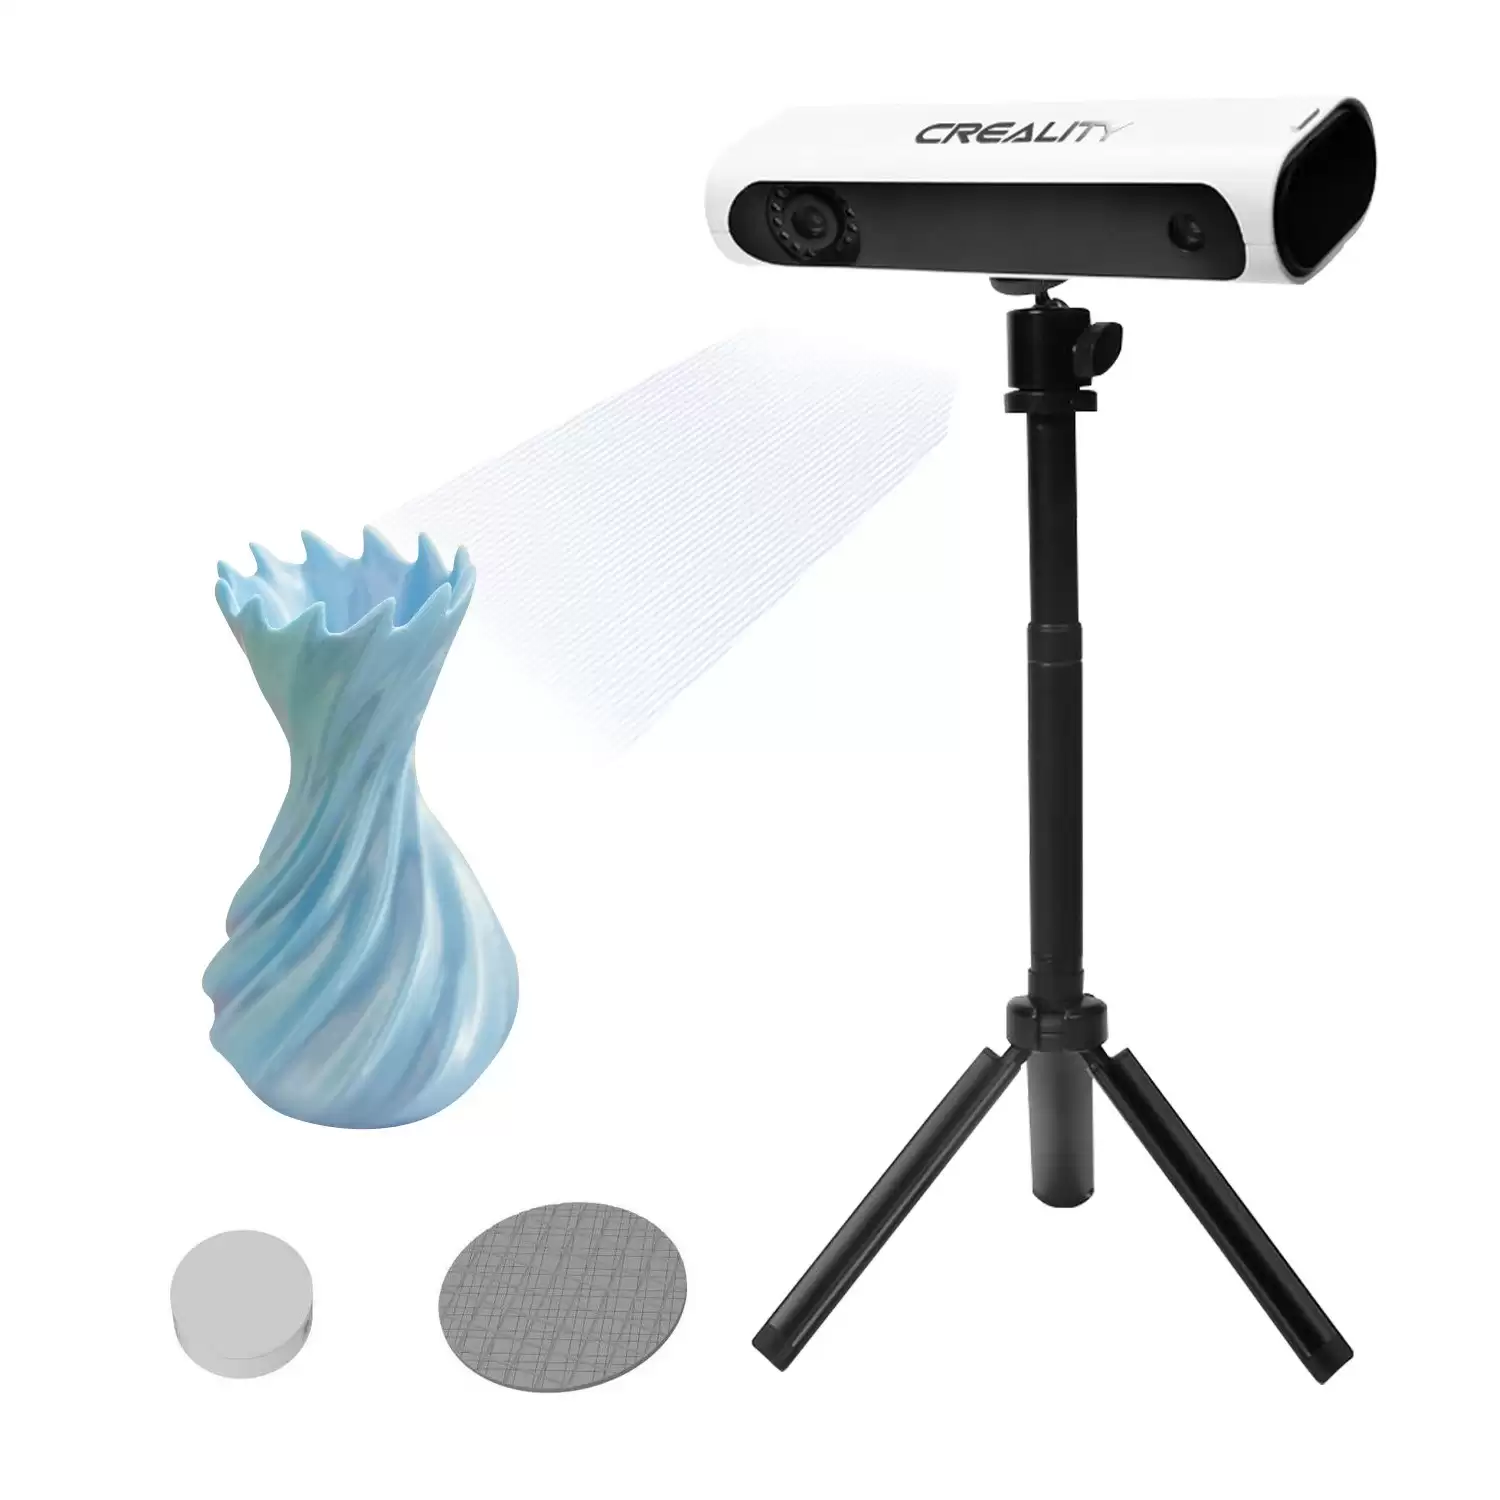 Order In Just $569 [Eu Warehouse] Original Creality Cr-Scan01 Portable 3d Scanner (With Turntable And Tripod) At Tomtop